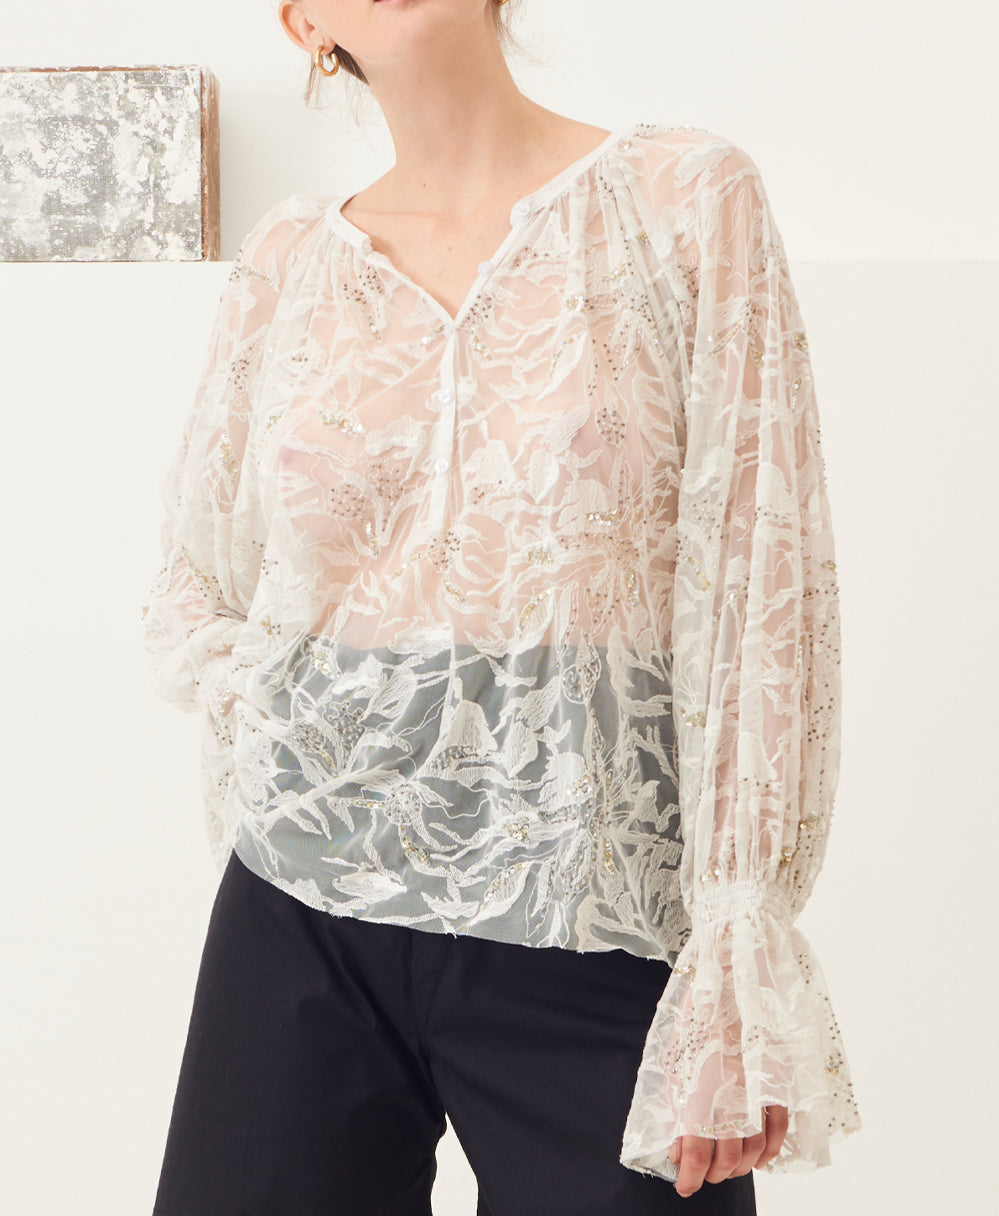 Adana embroidered blouse